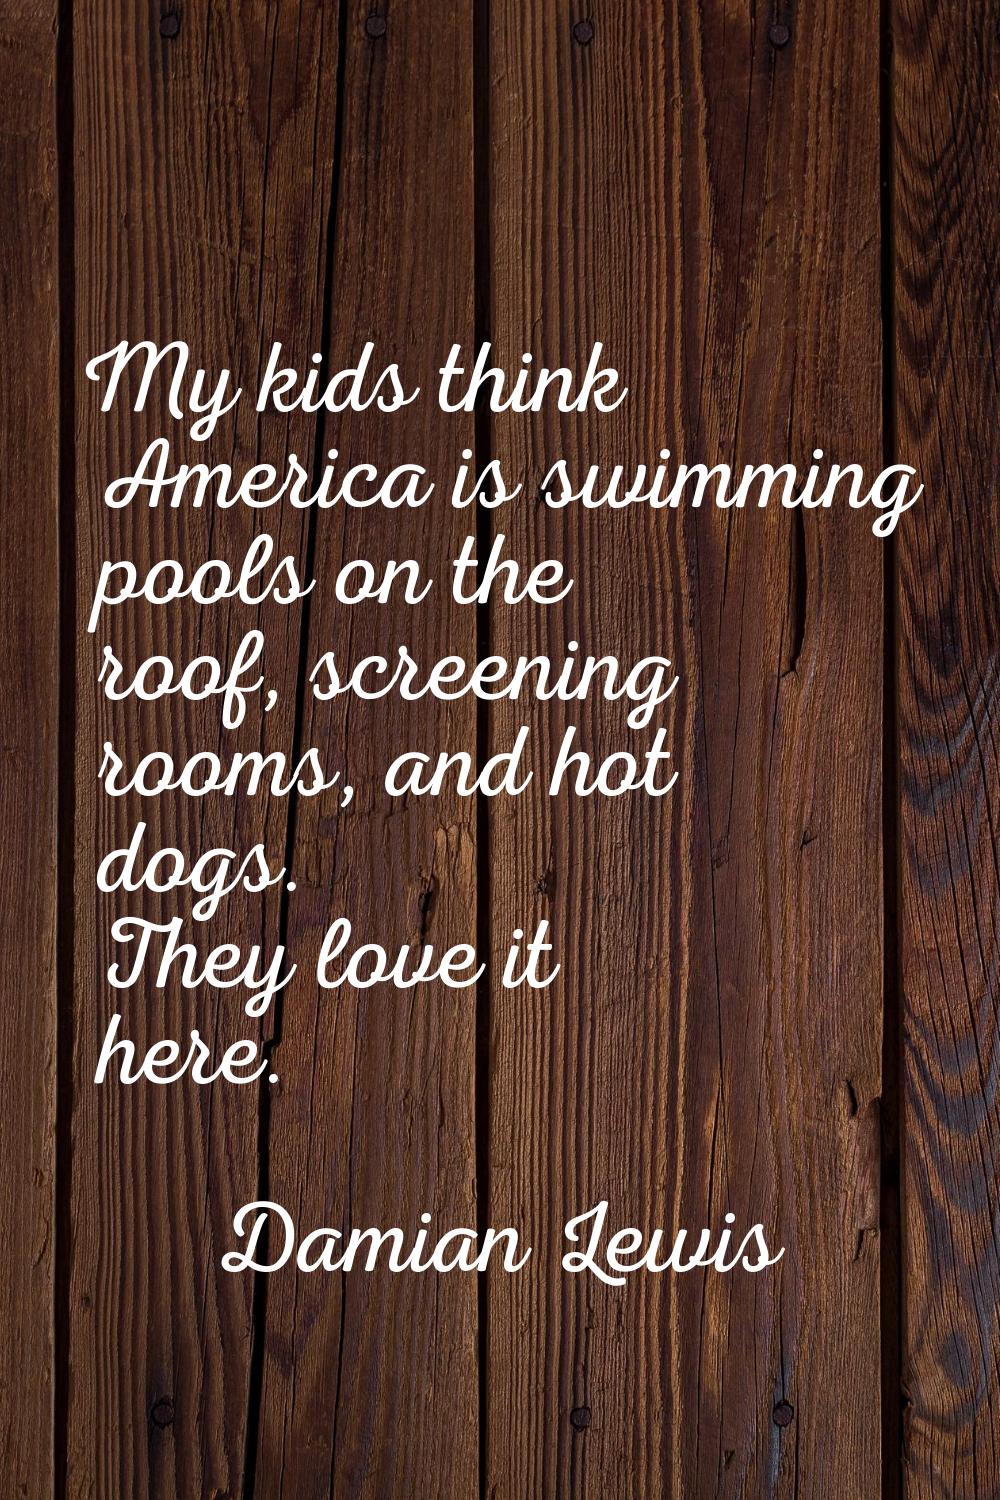 My kids think America is swimming pools on the roof, screening rooms, and hot dogs. They love it he